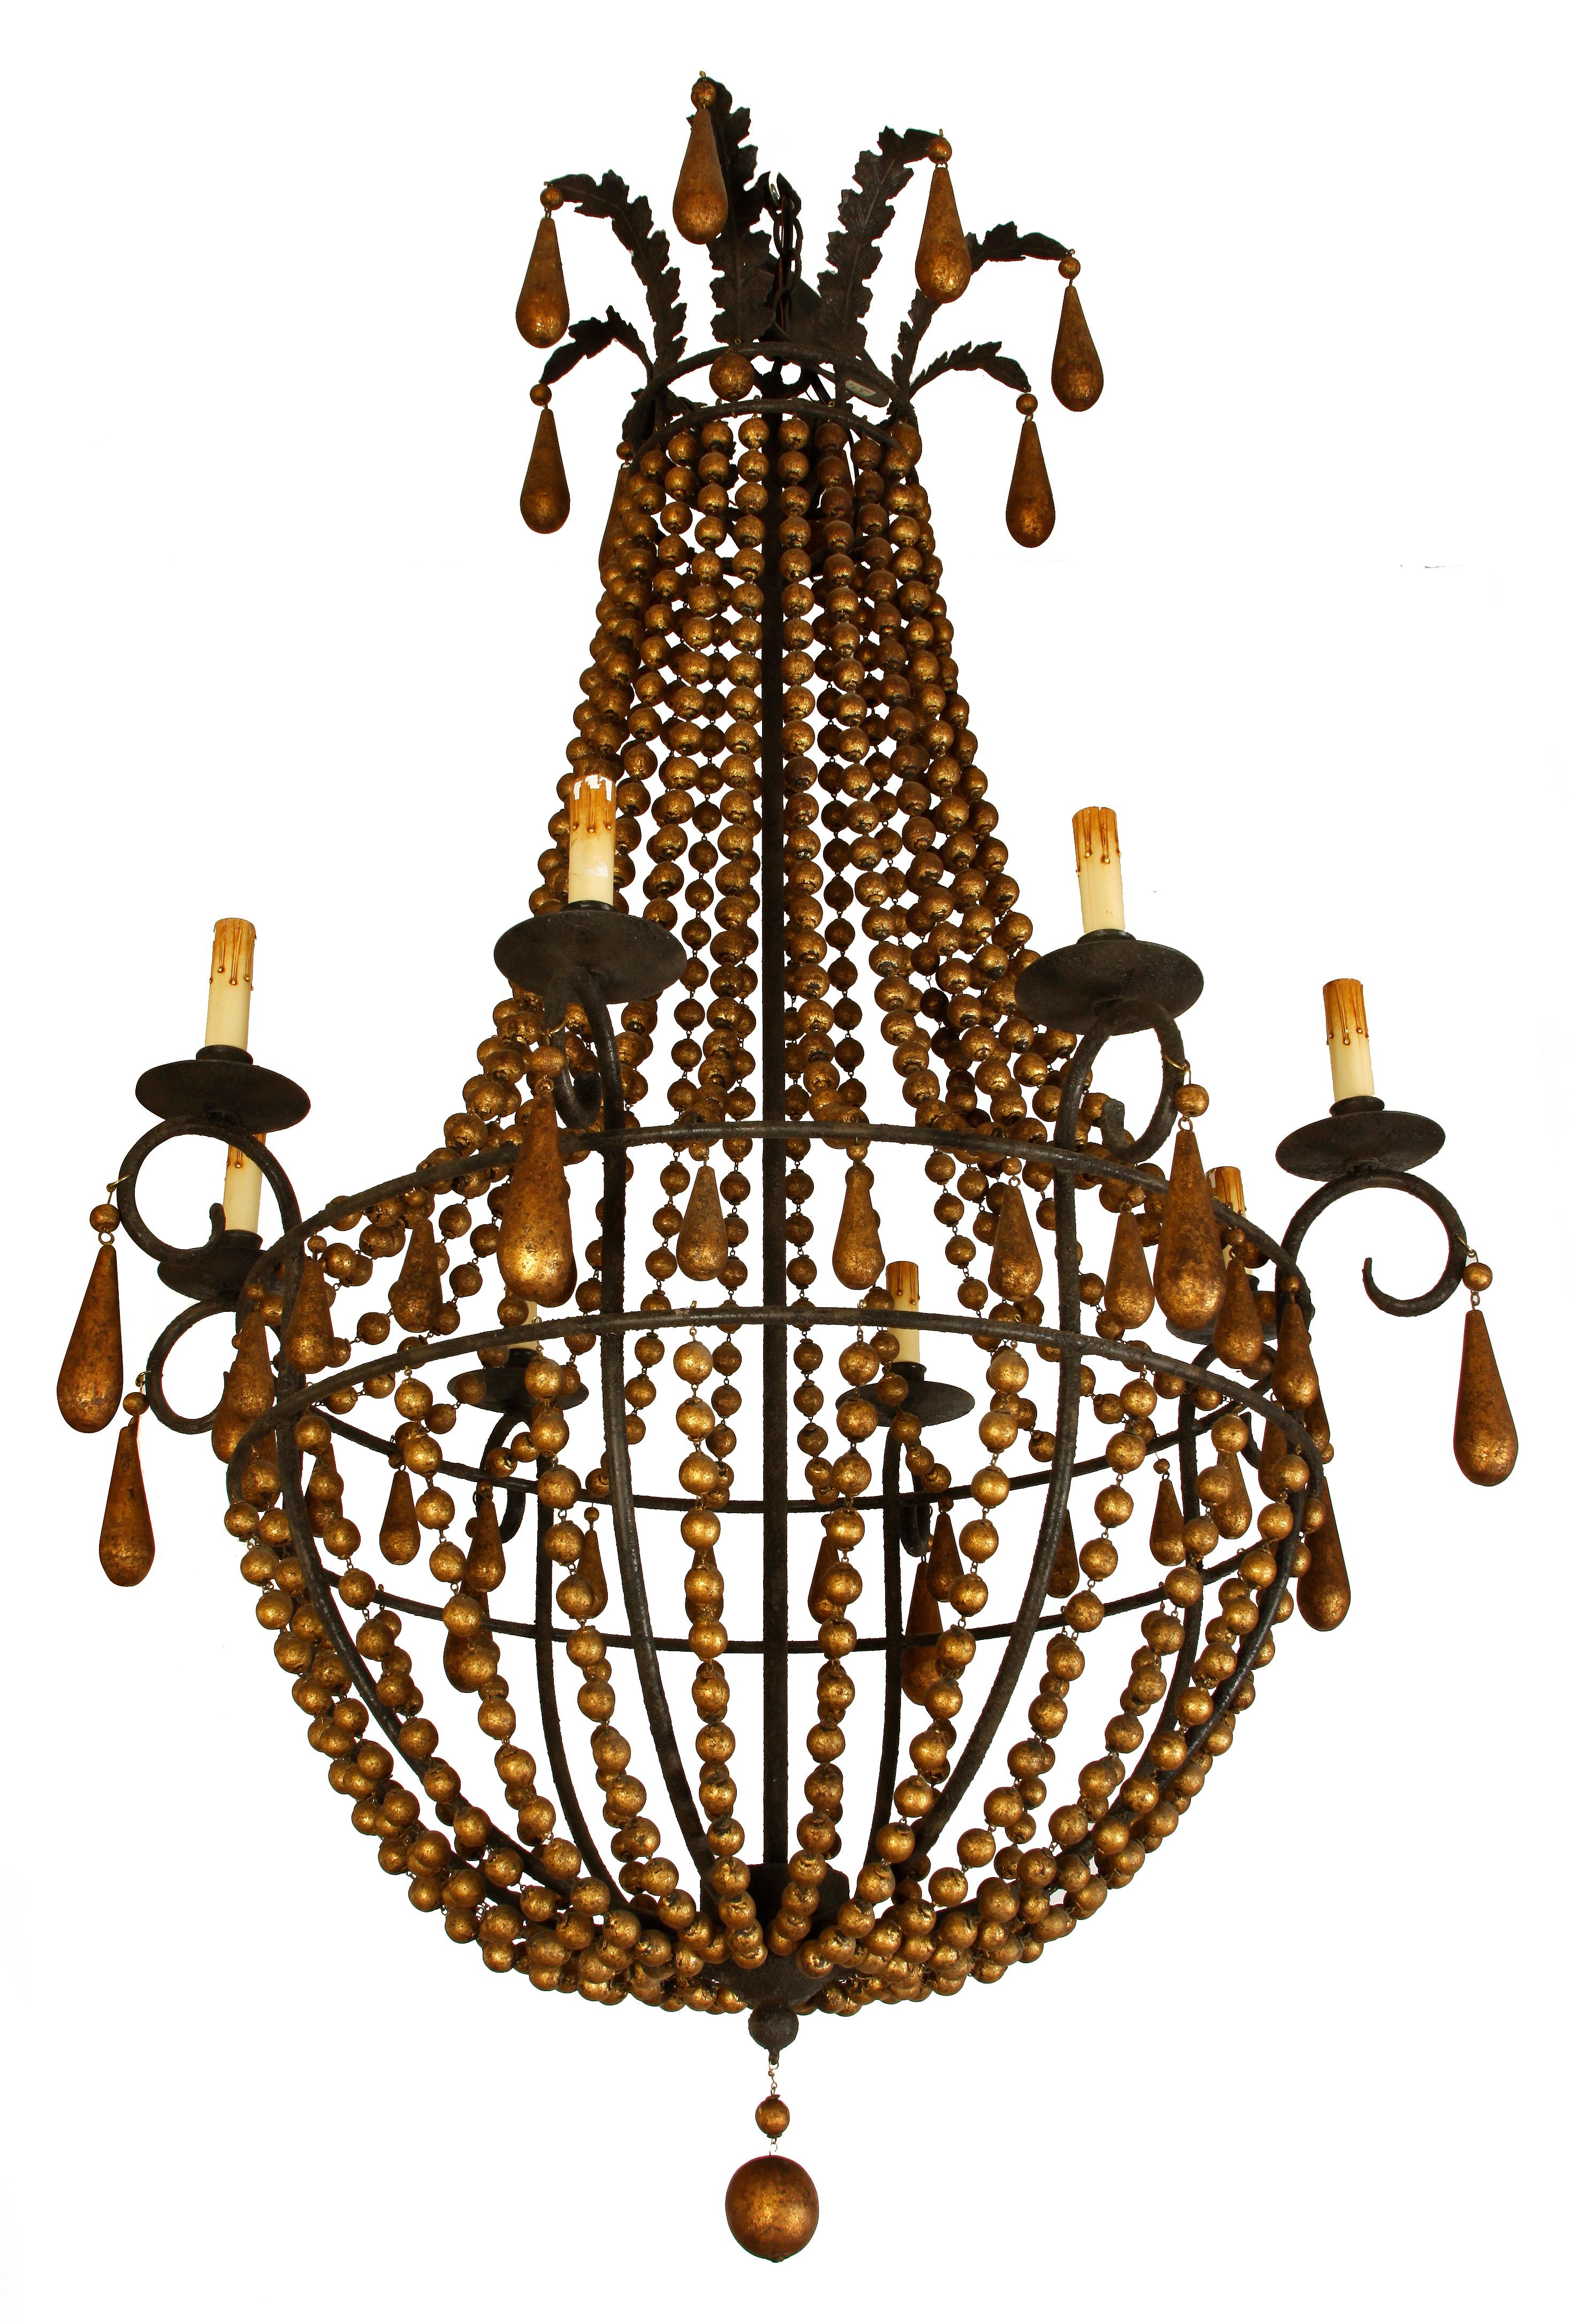 Neoclassical chandelier with eight arms beautifully constructed from wood beads.